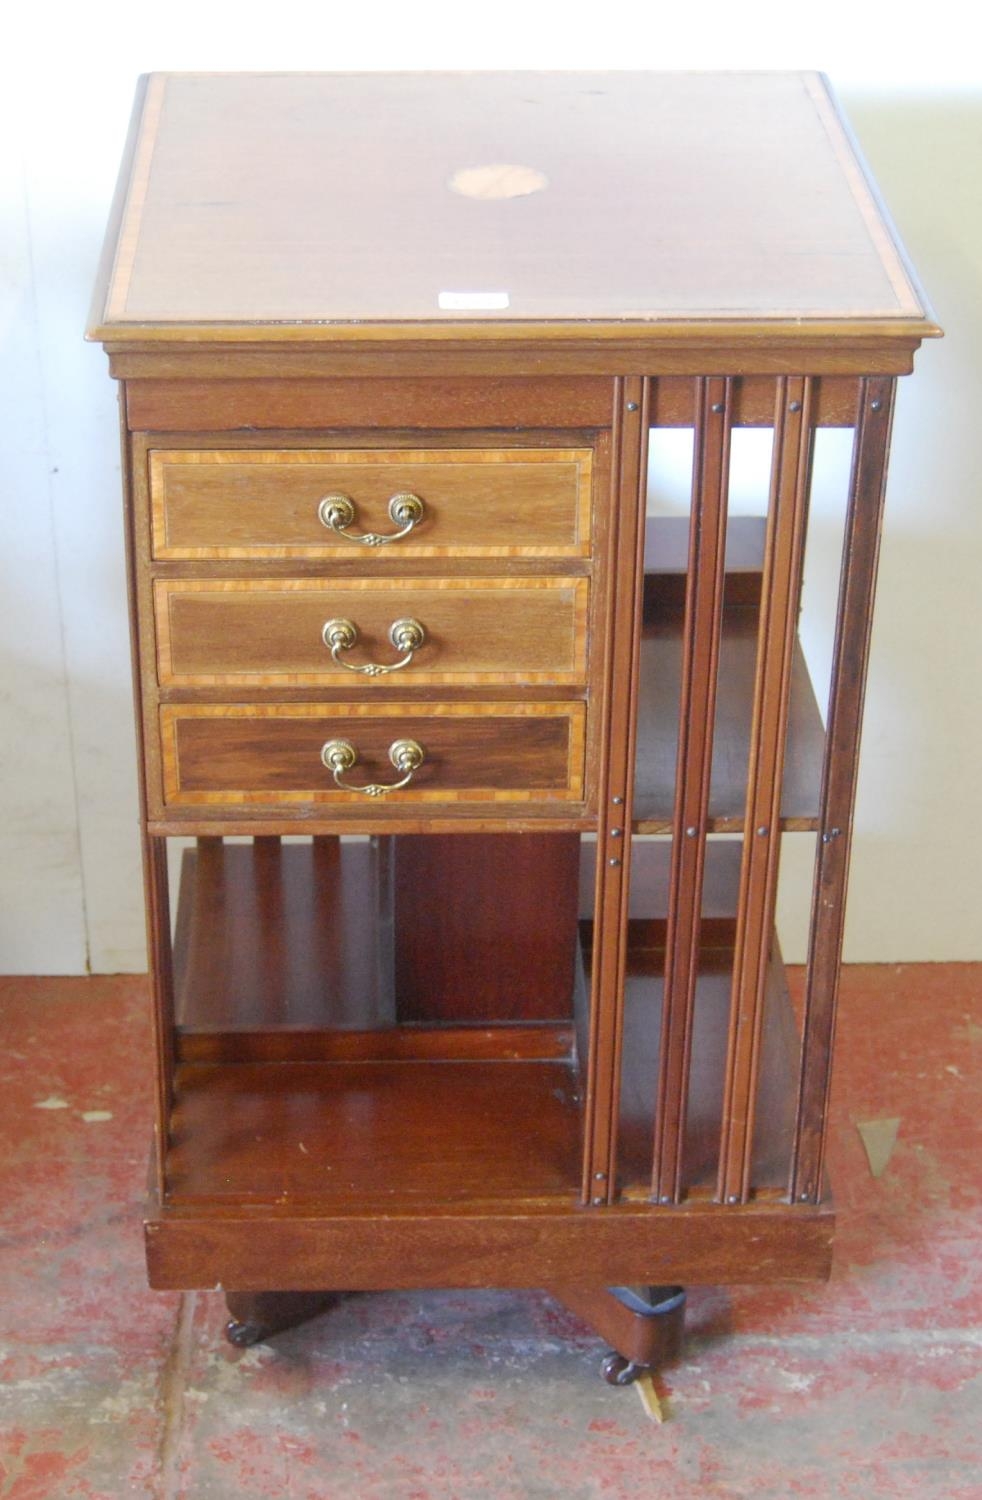 Edwardian inlaid mahogany revolving bookcase, with open shelving and three short drawers to the